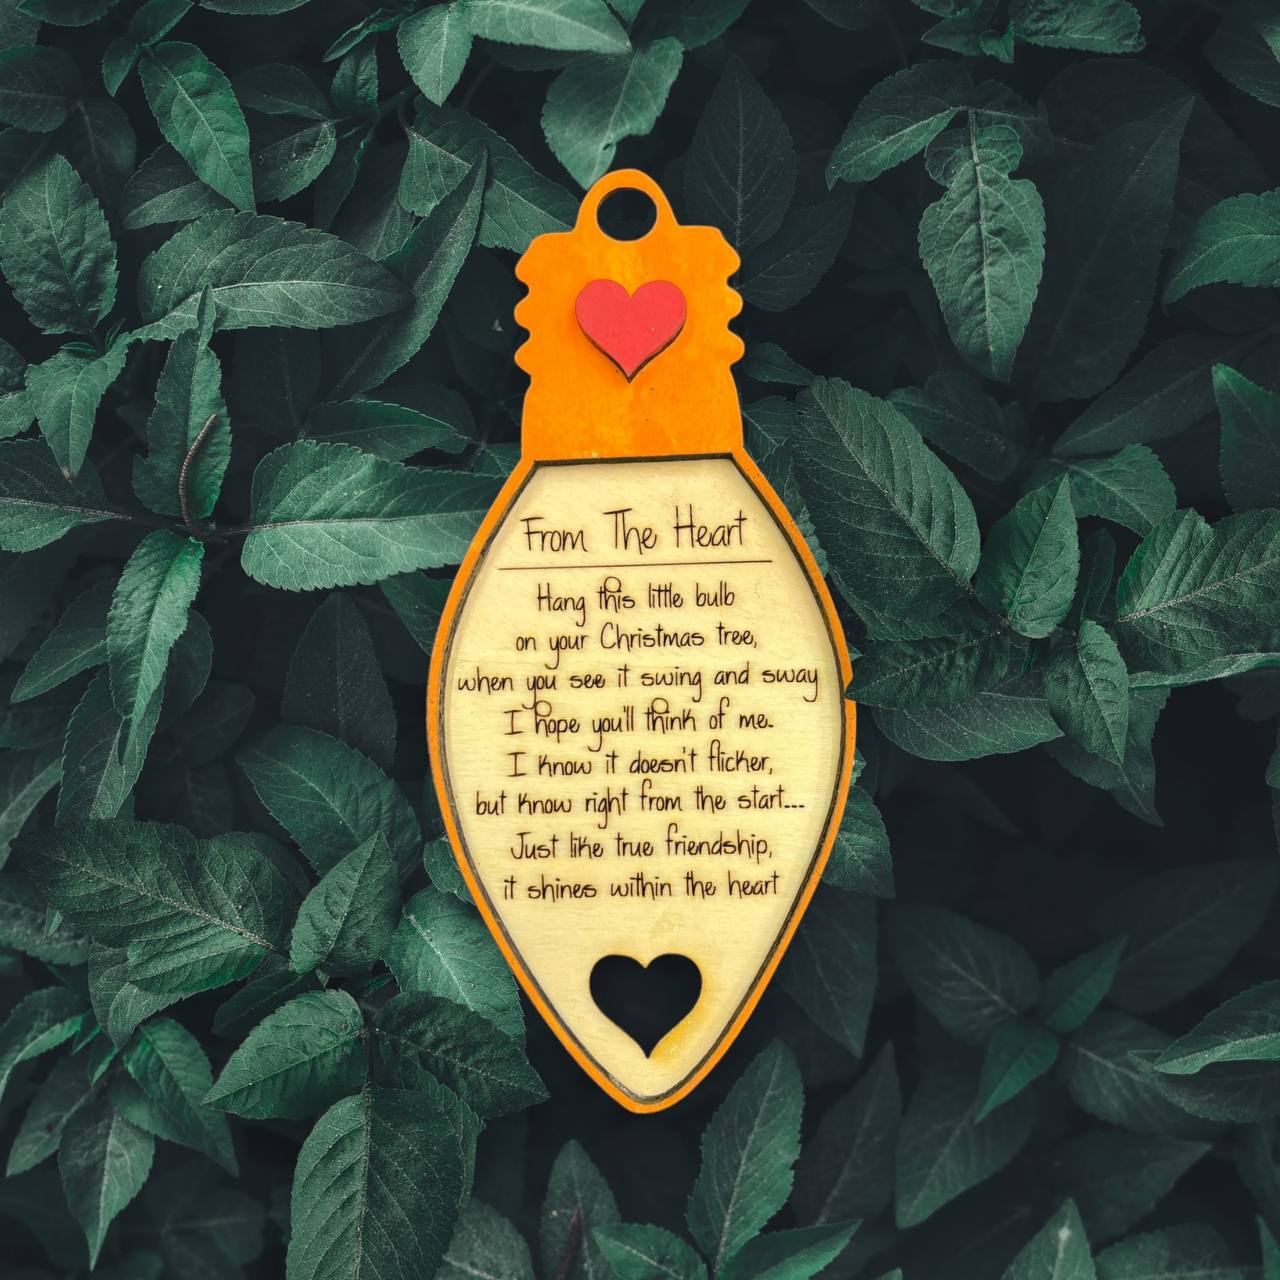 From the Heart Light Ornament